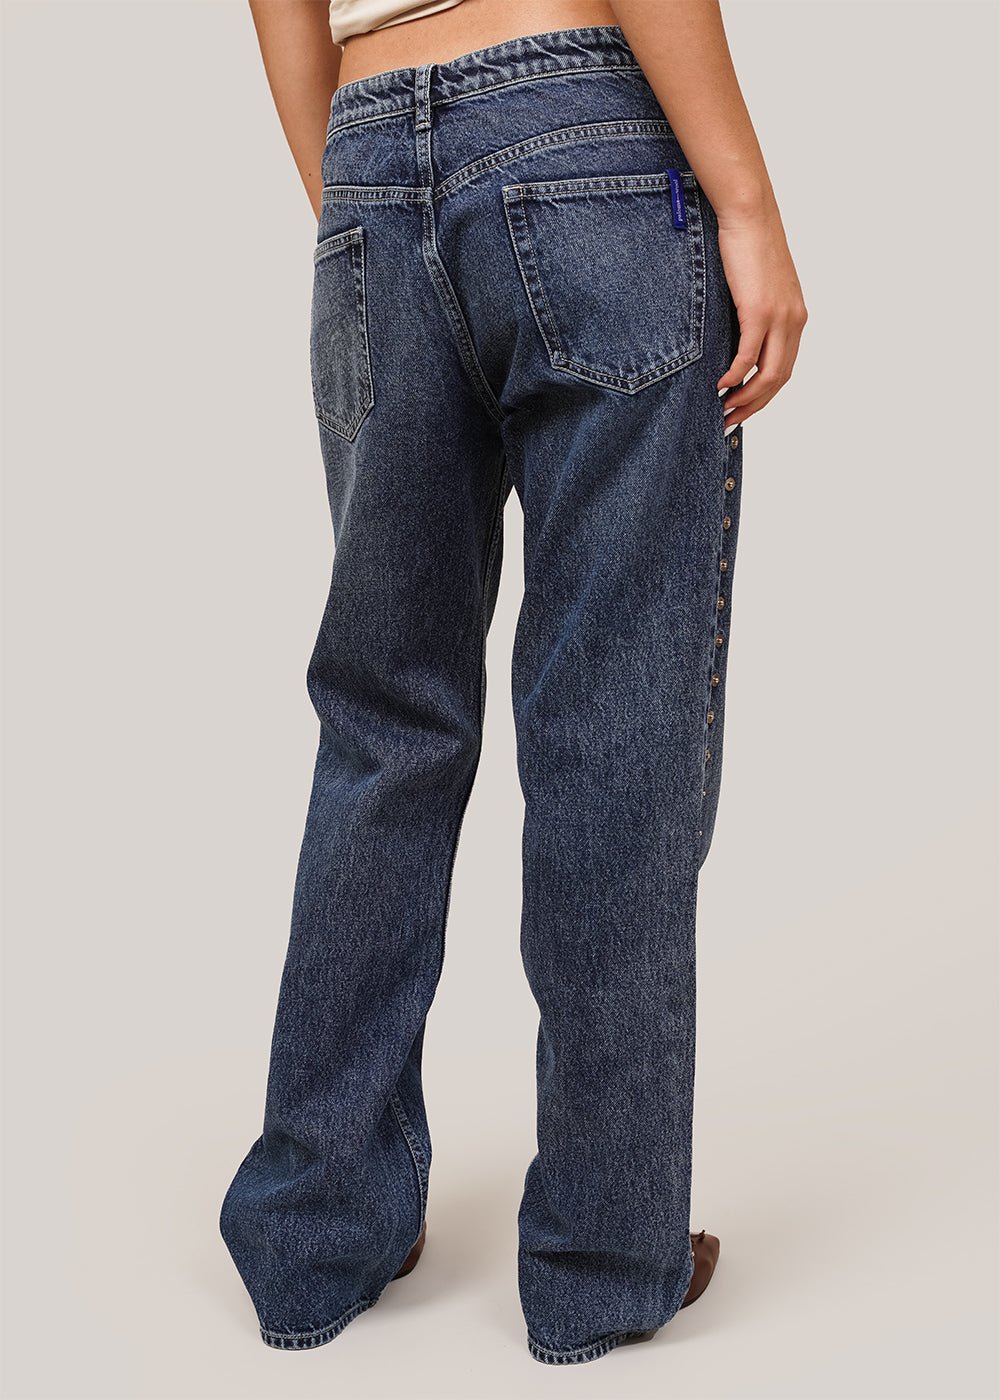 Paloma Wool Denim Crowd Jeans - New Classics Studios Sustainable Ethical Fashion Canada